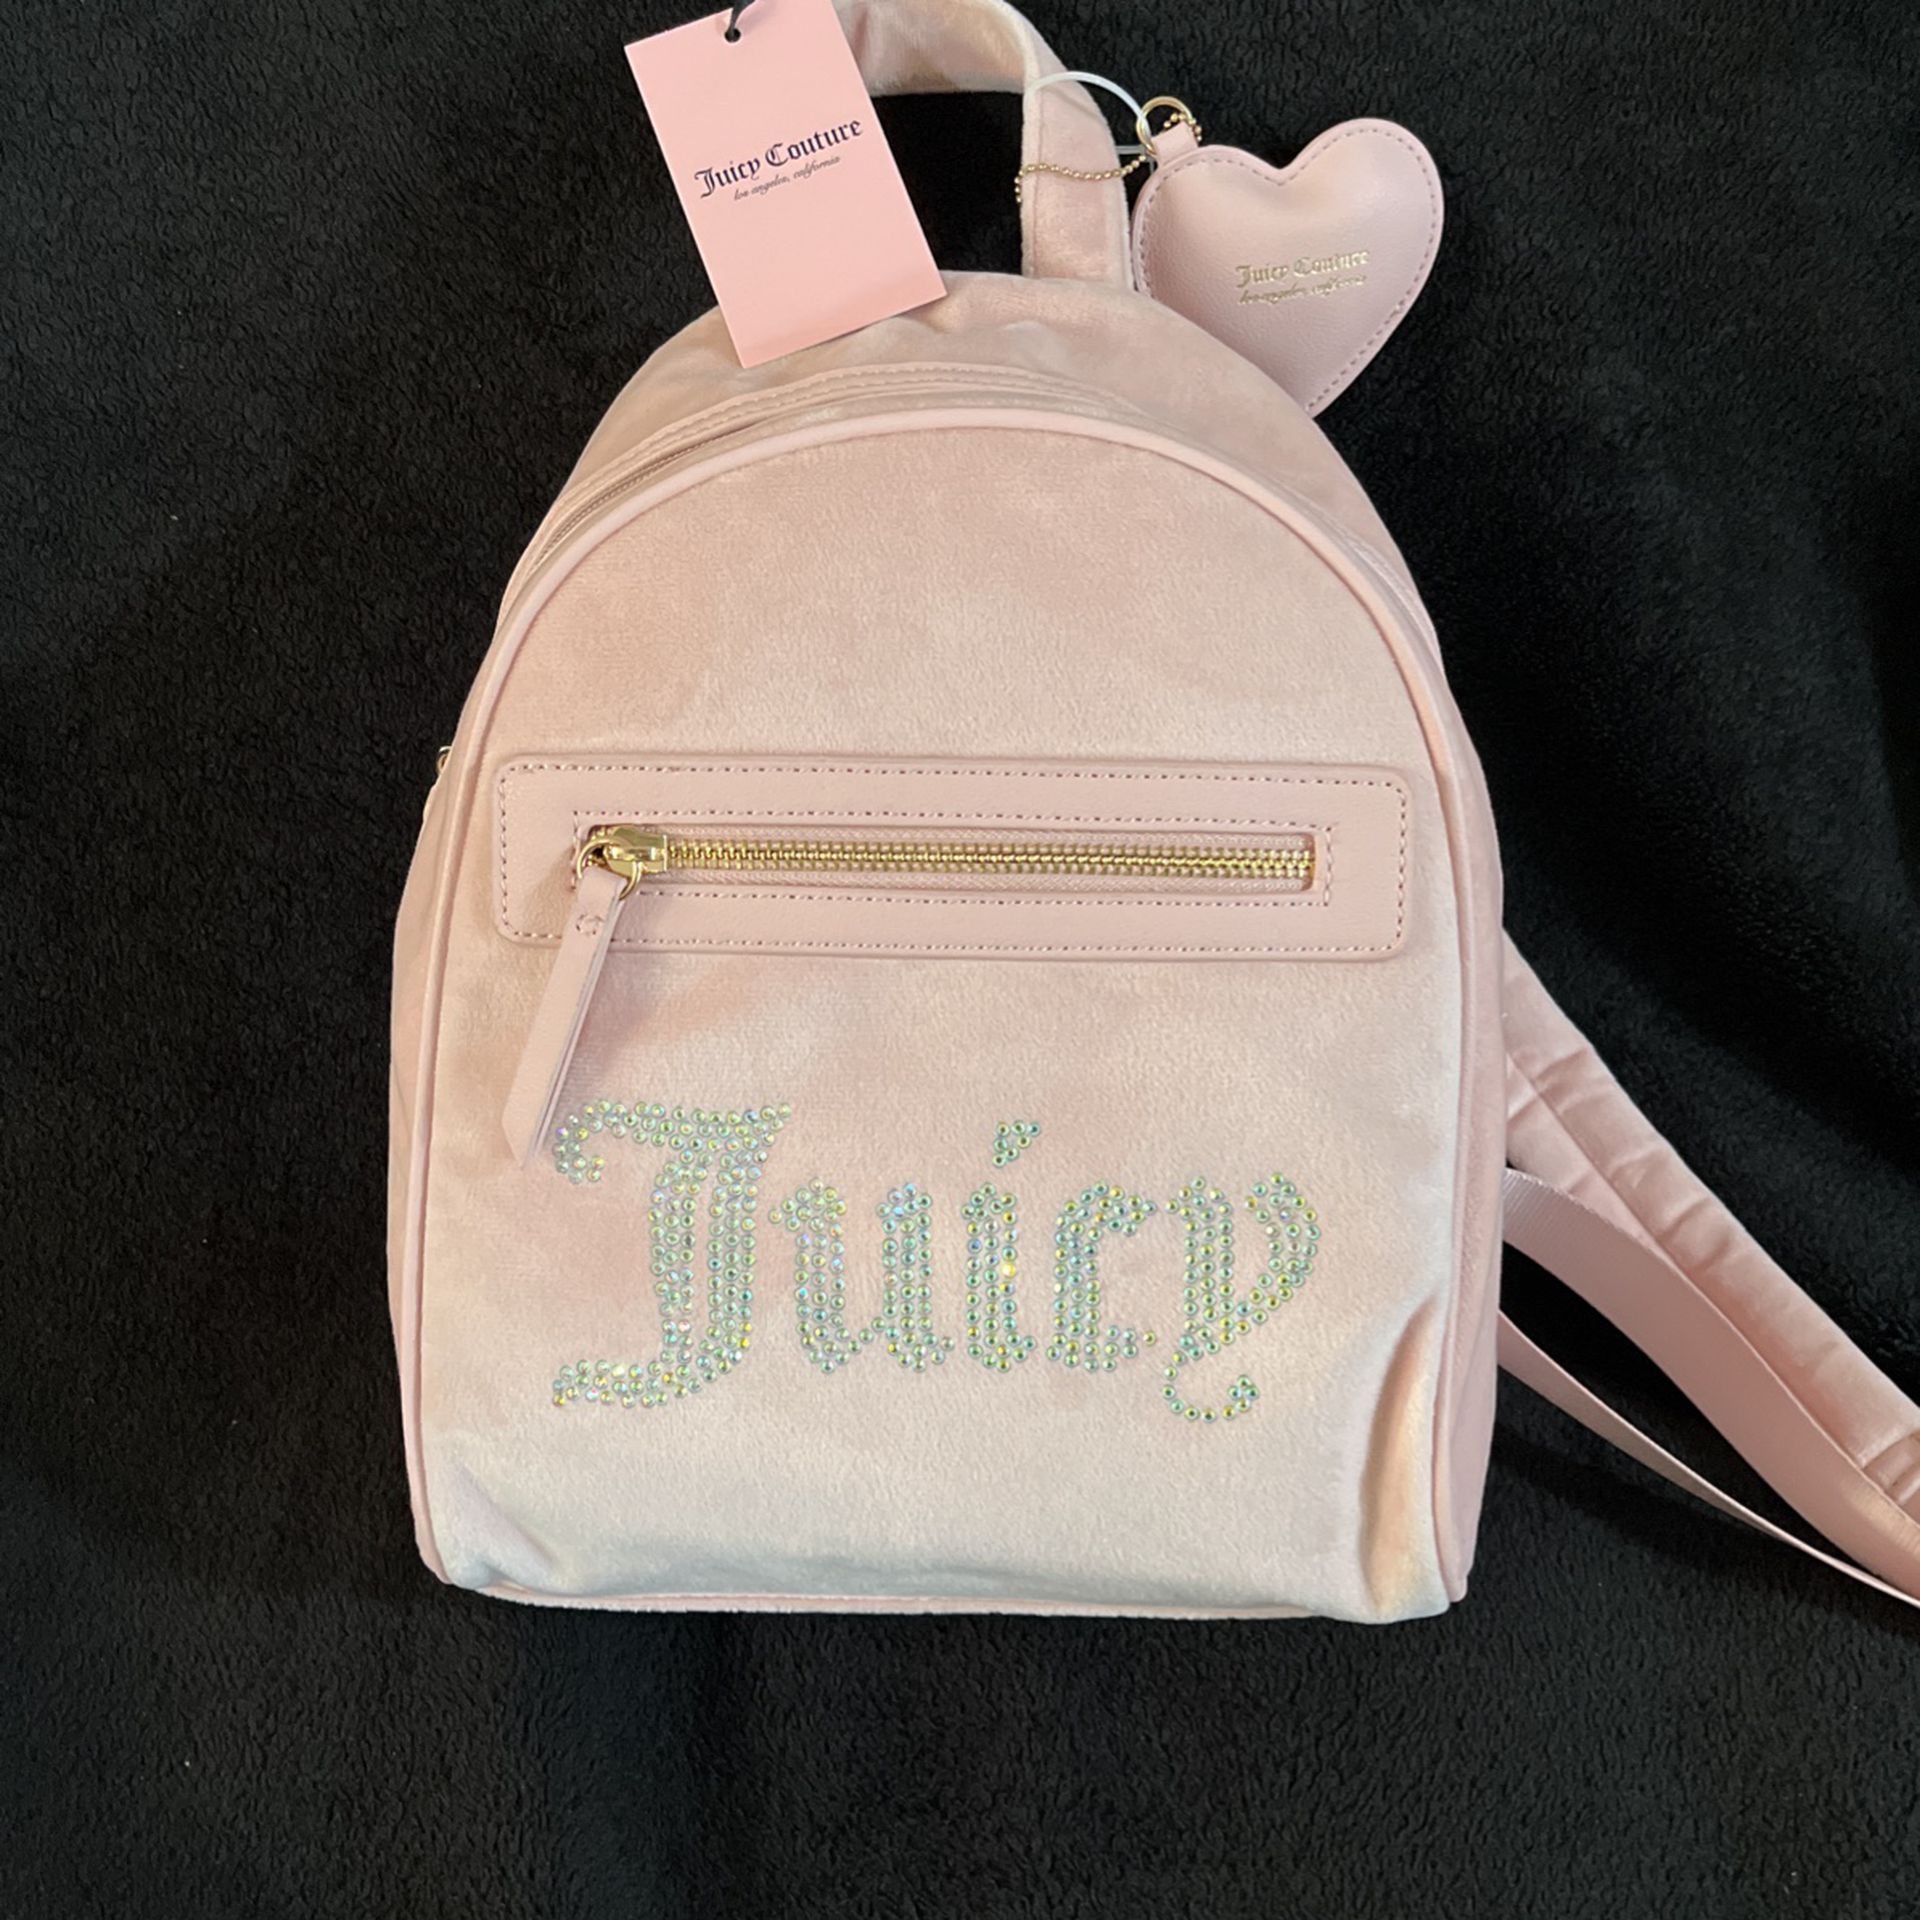 JUICY COUTURE velvet Bag ( Price Is Firm) Perfect For Mothers Day 💐 Or Graduation 👩‍🎓 